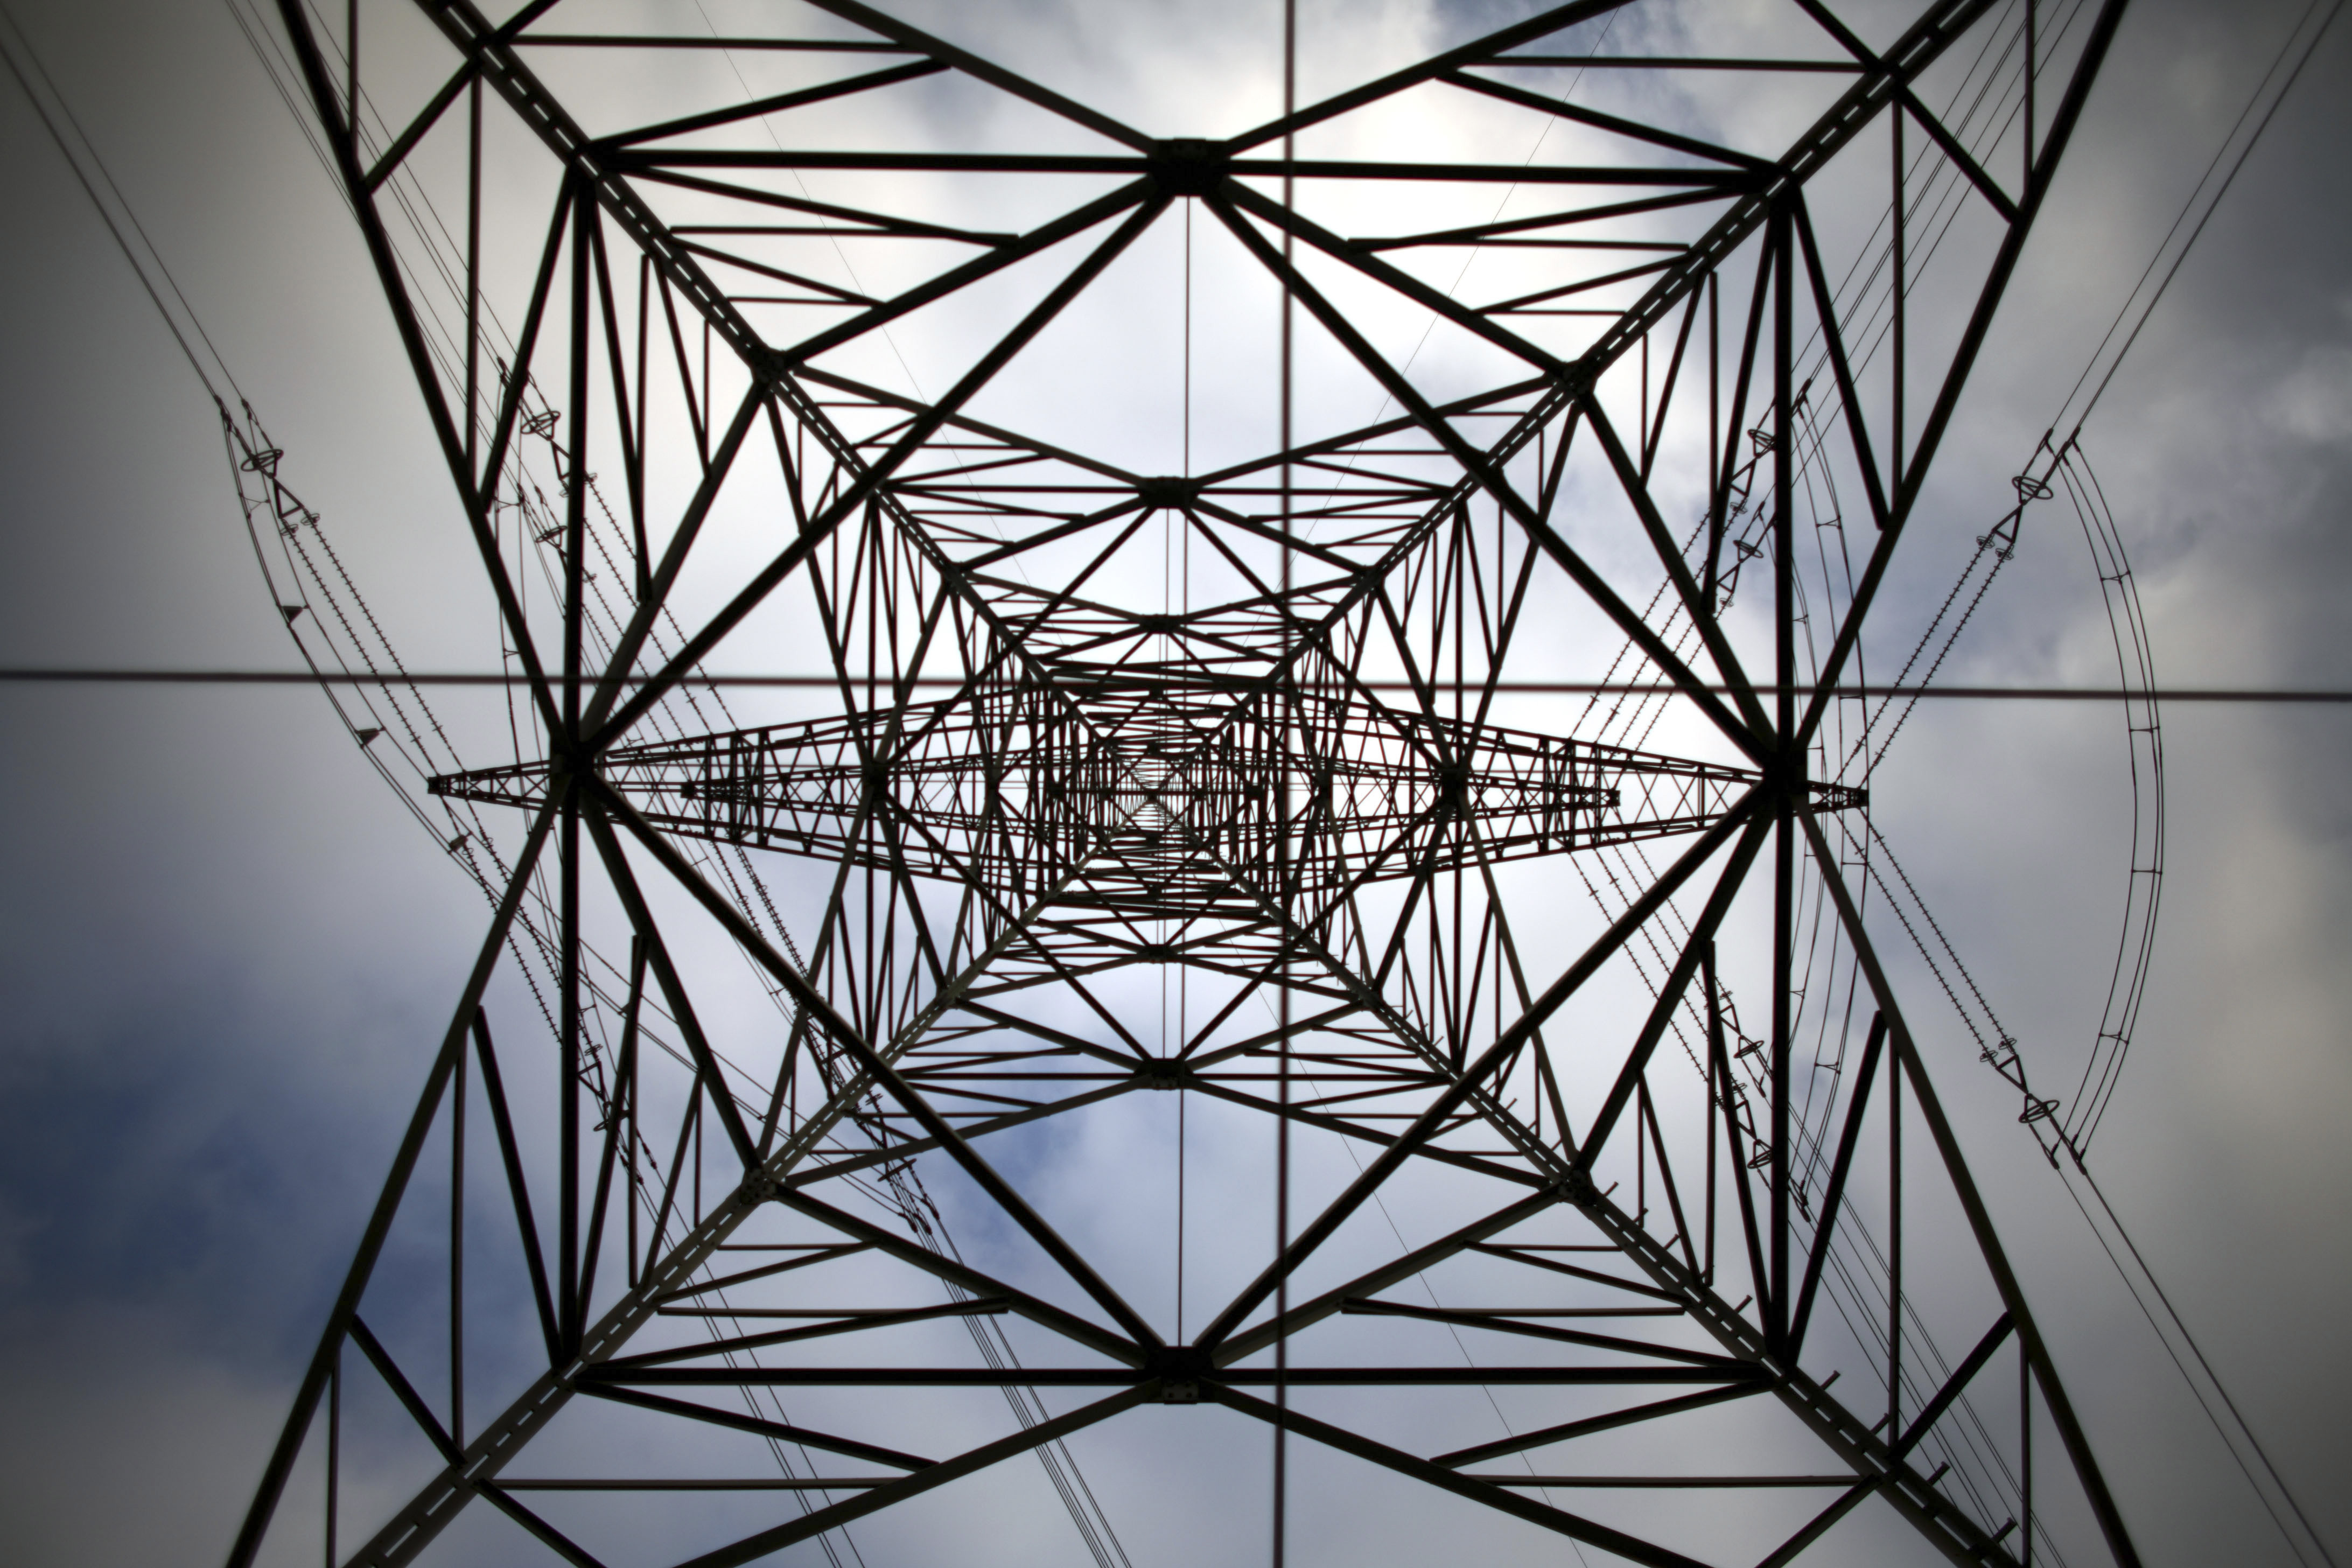 File picture shows a high-voltage power line tower near Berlin